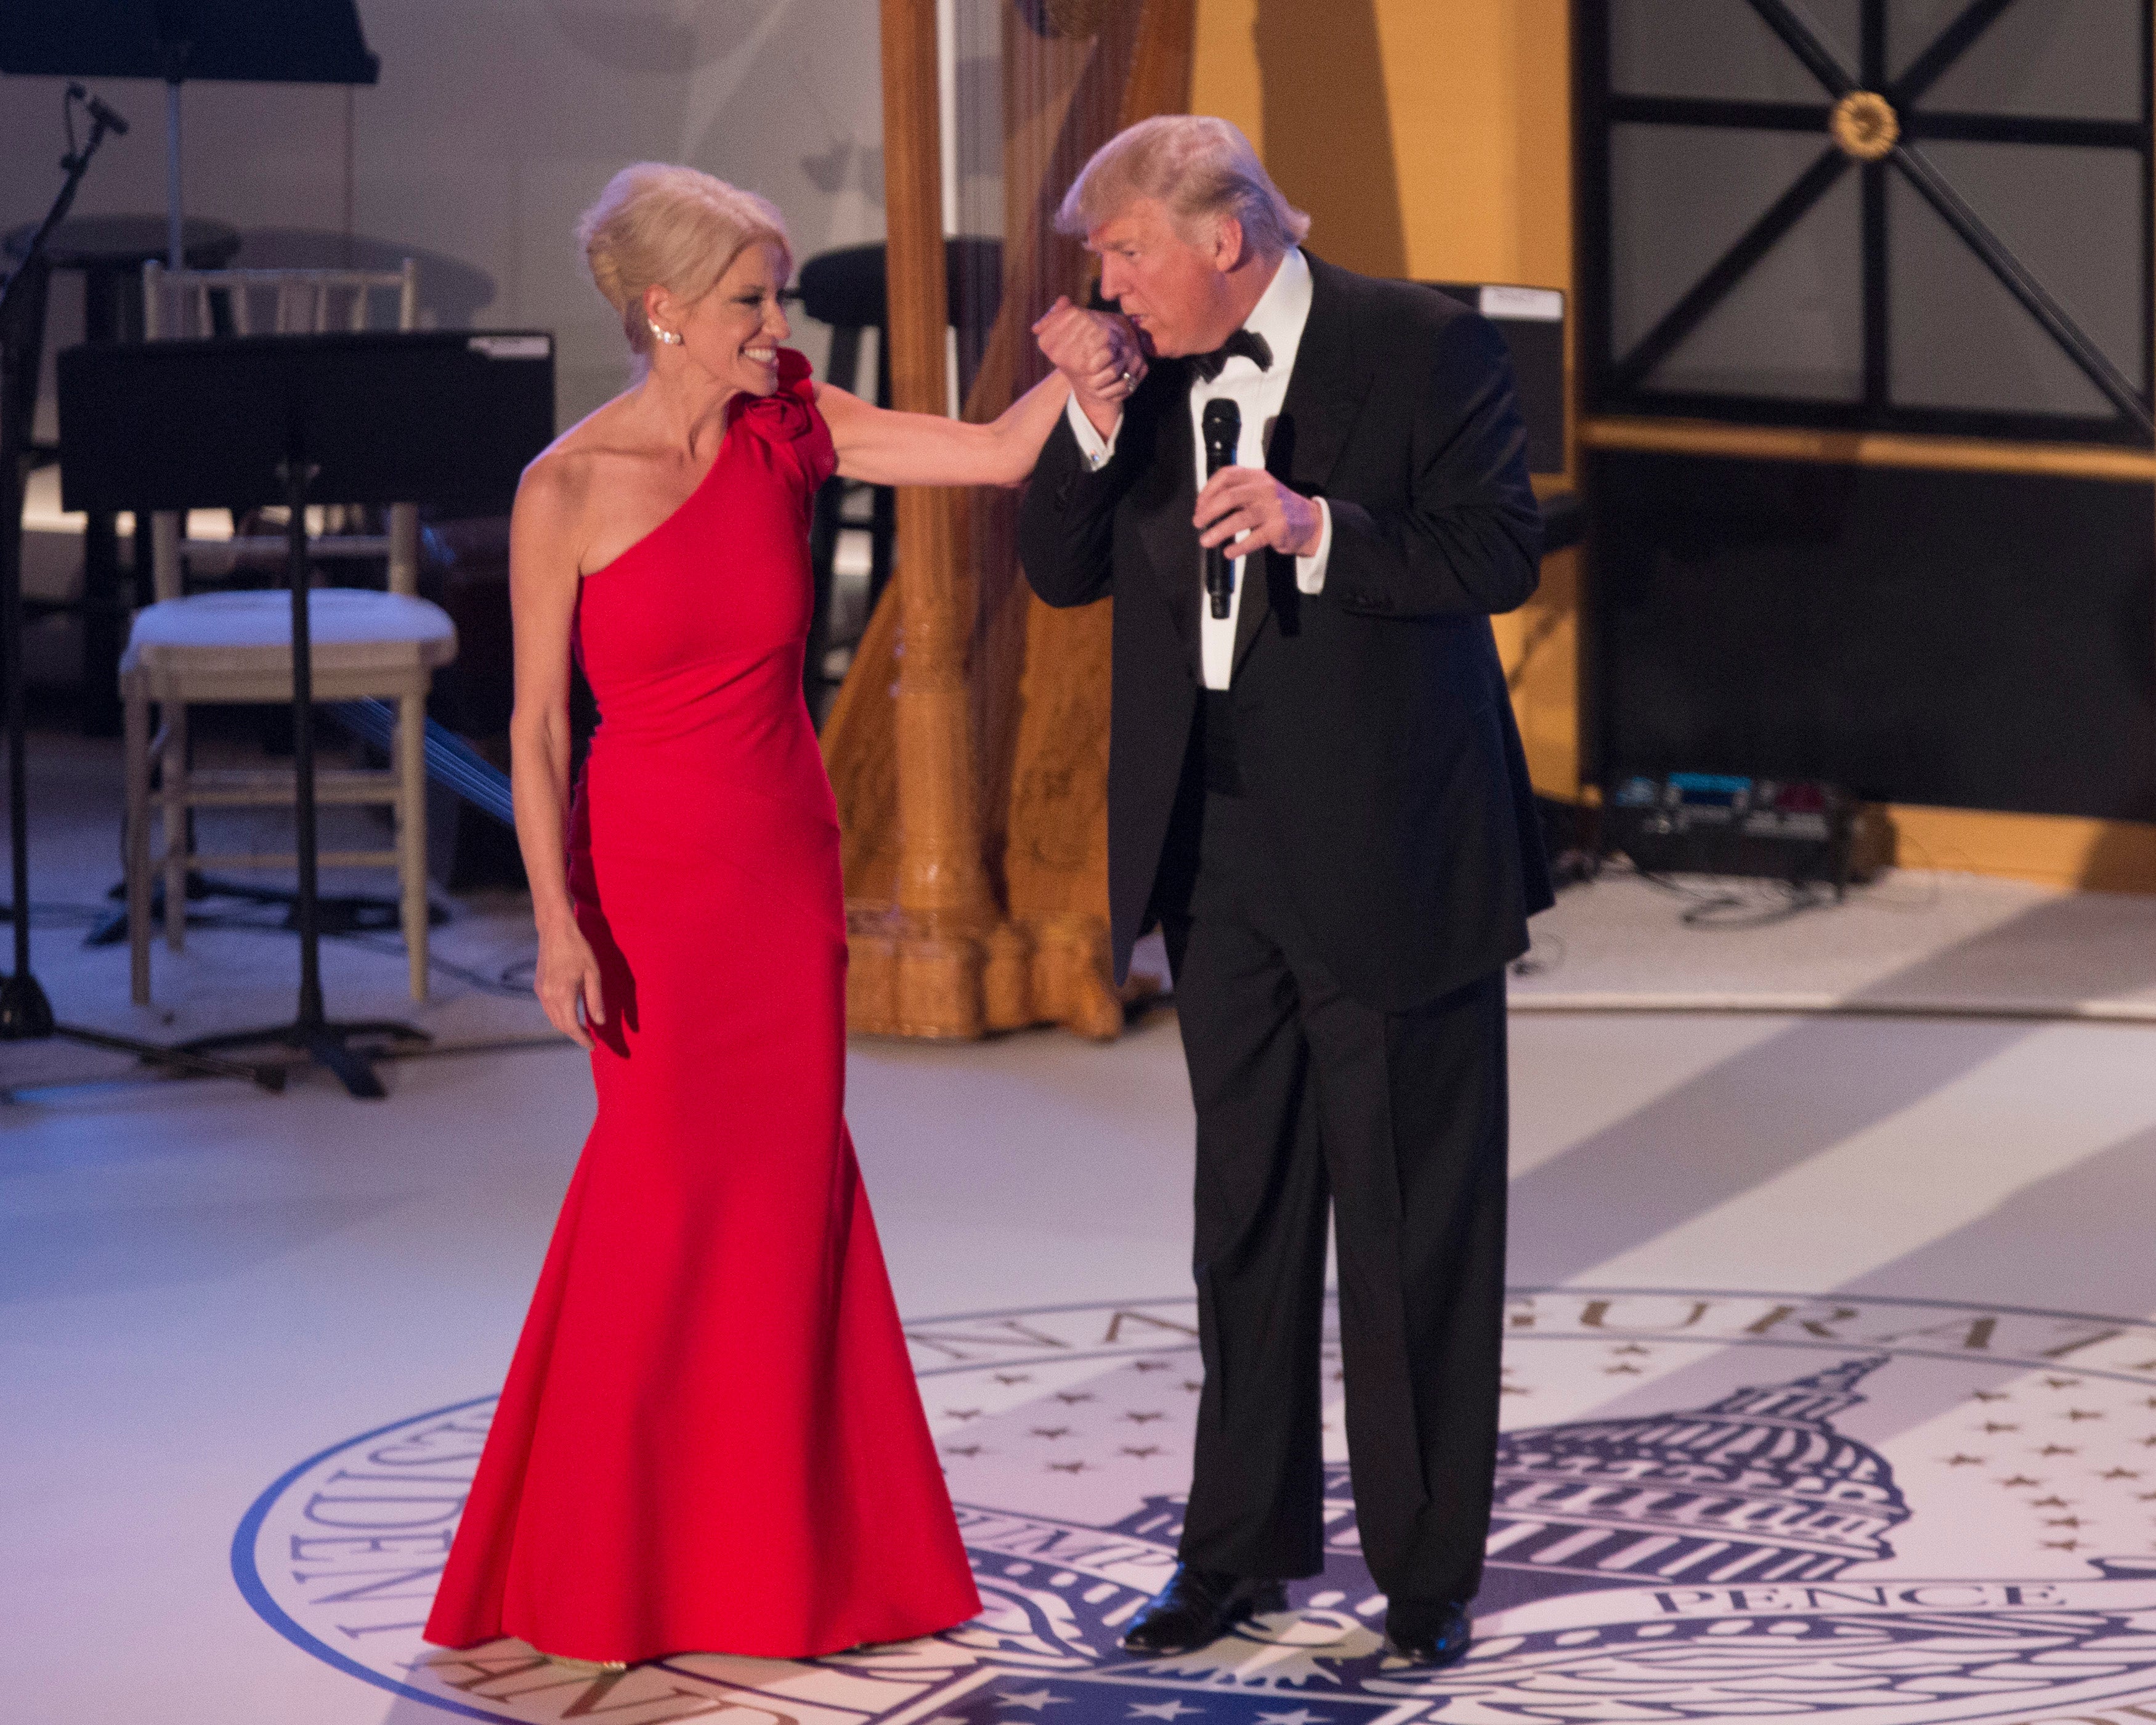 Donald Trump and Kellyanne Conway at the Indiana Society Ball to thank donors on January 19, 2017 in Washington, DC